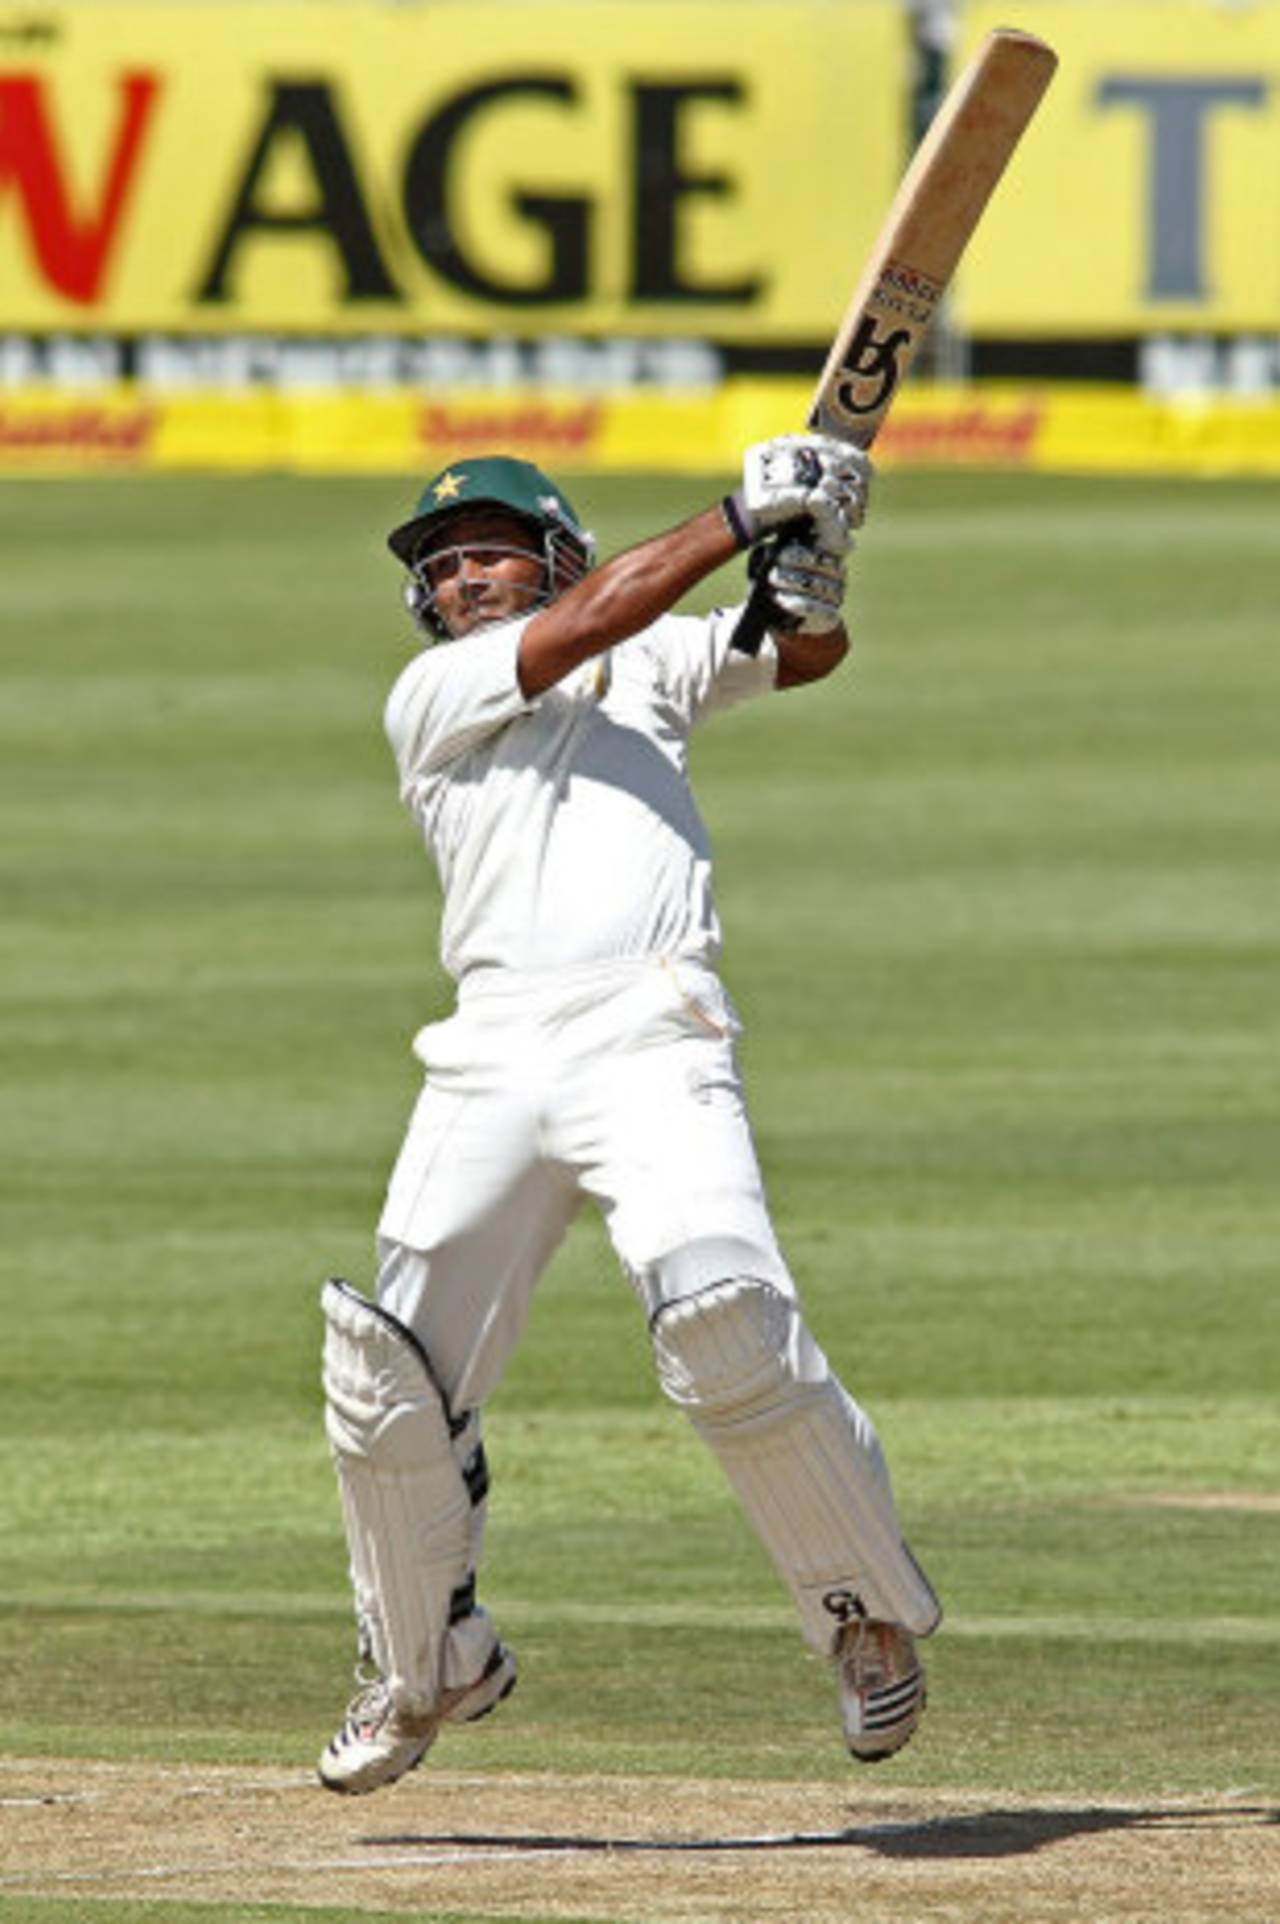 A century in South Africa in his 18th Test? No wonder Shafiq finds it hard to keep his feet grounded&nbsp;&nbsp;&bull;&nbsp;&nbsp;Getty Images